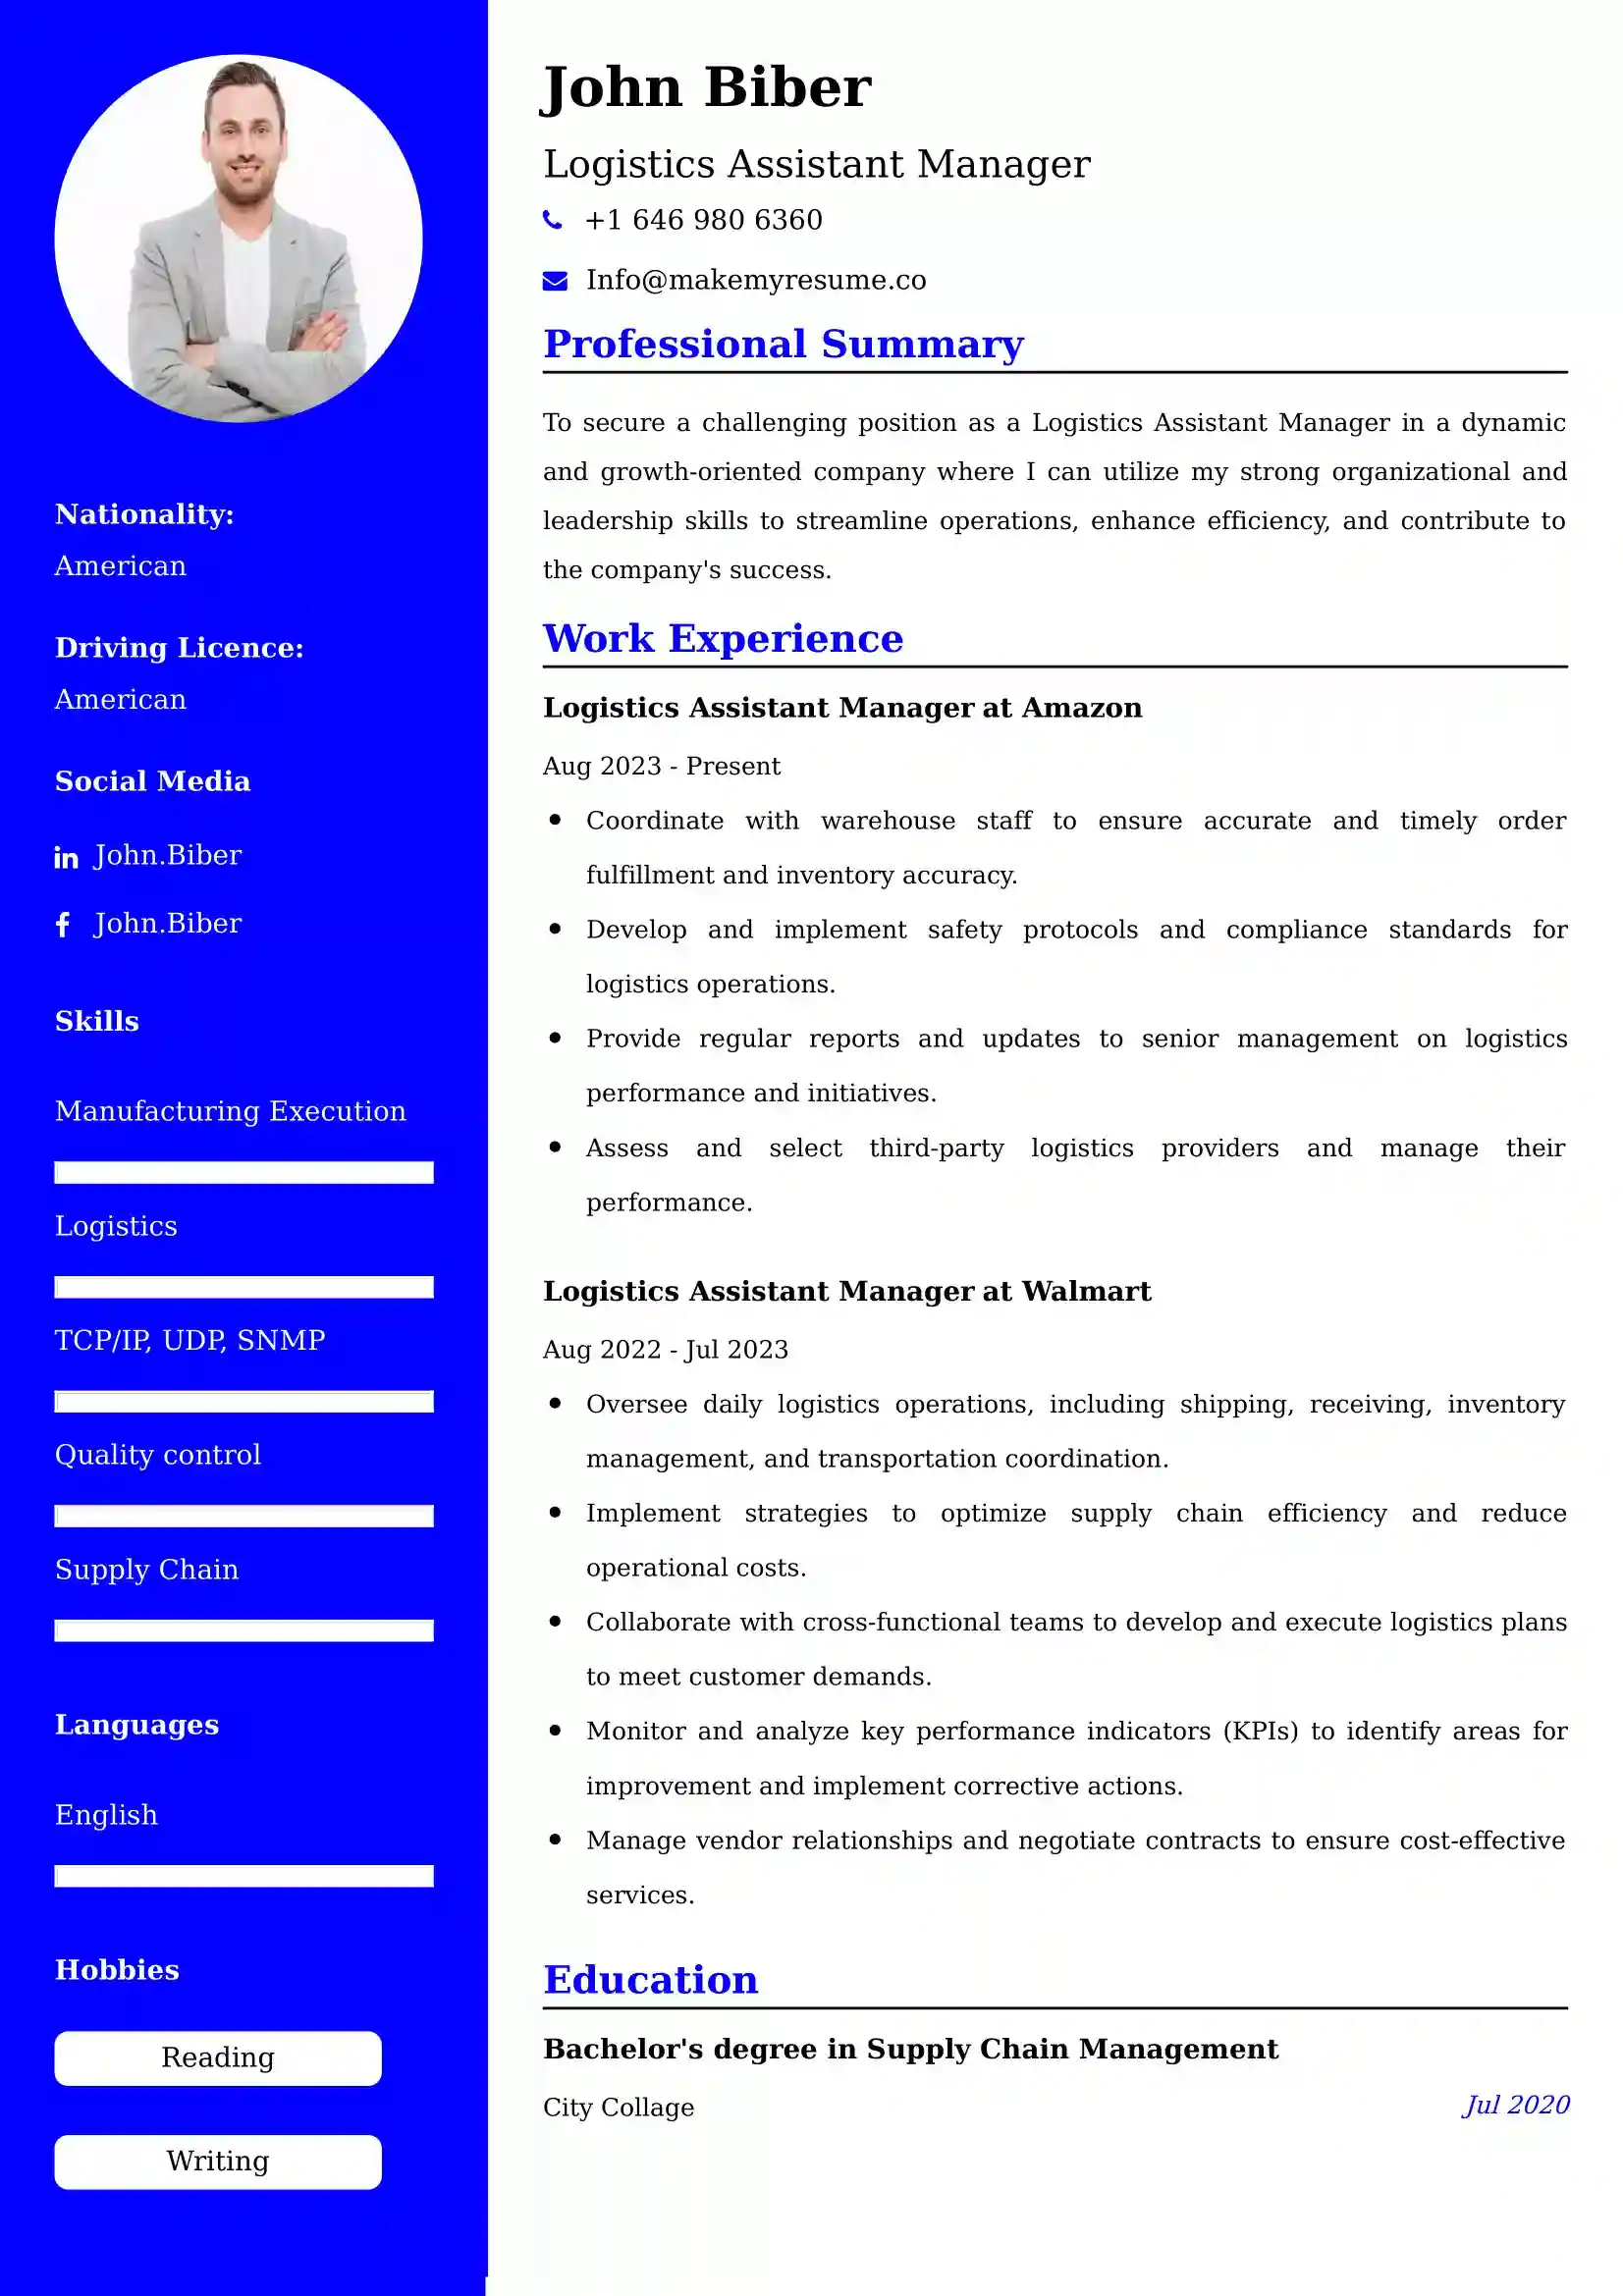 Logistics Assistant Manager Resume Examples - Brazilian Format, Latest Template